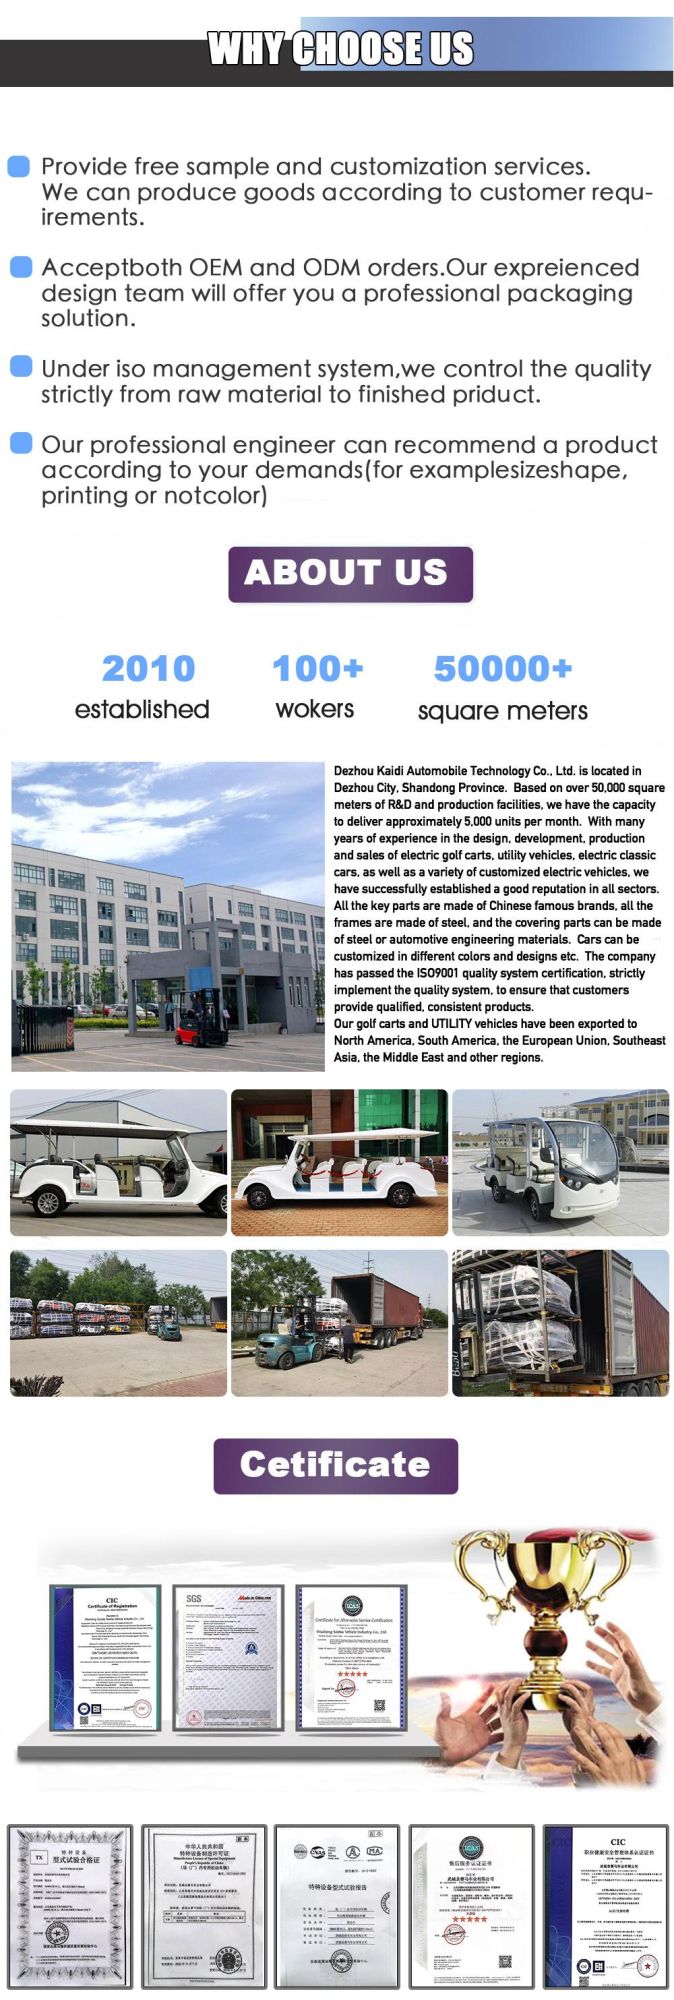 Hot Sale 14 Sear Electric Sightseeing Bus Electric Tour Bus Electric Amusement Train for Resort